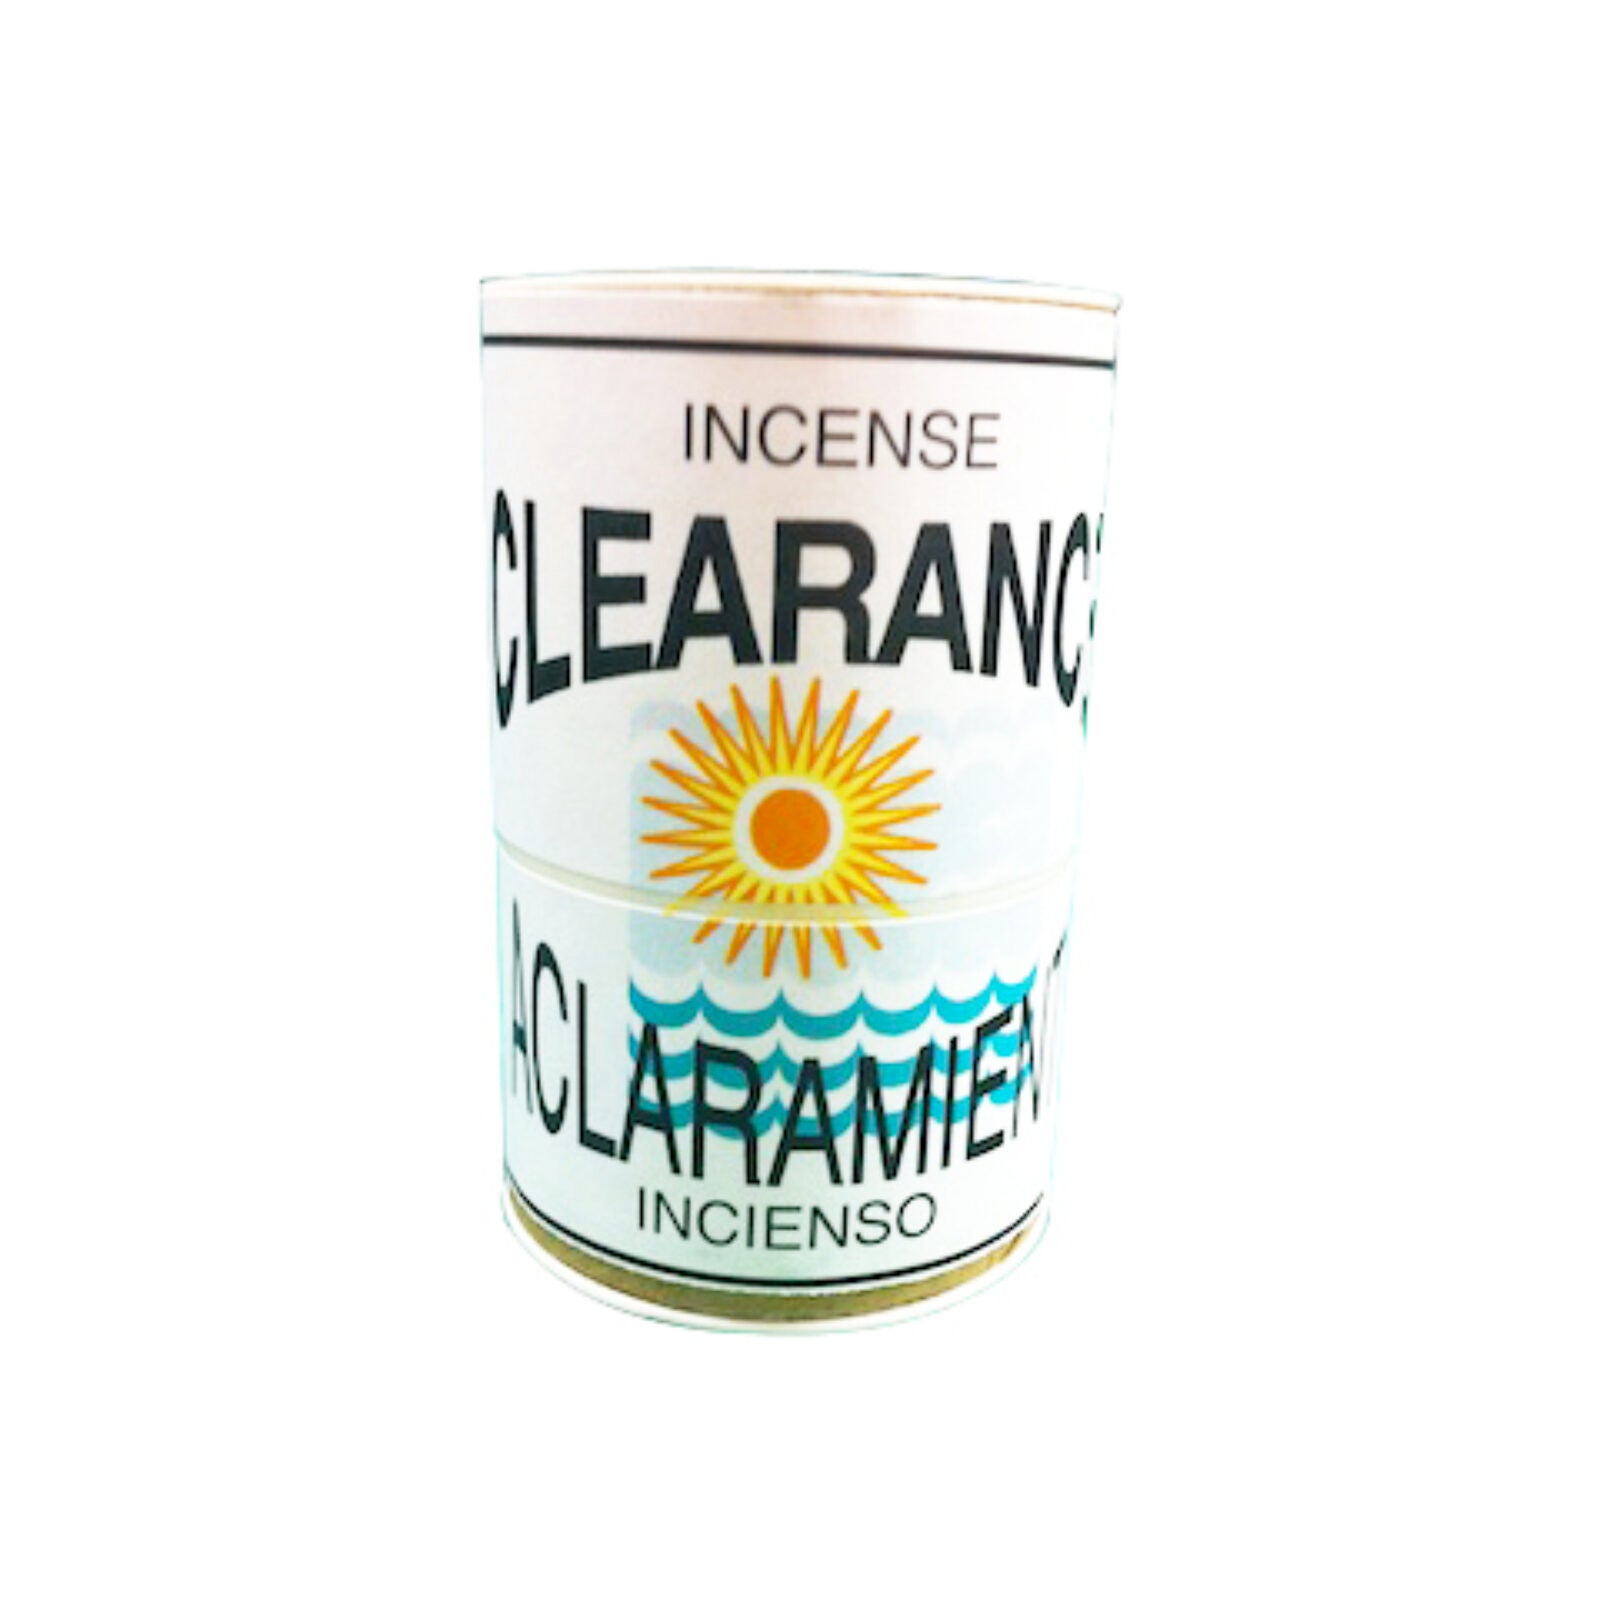 Clearance Incense Powder